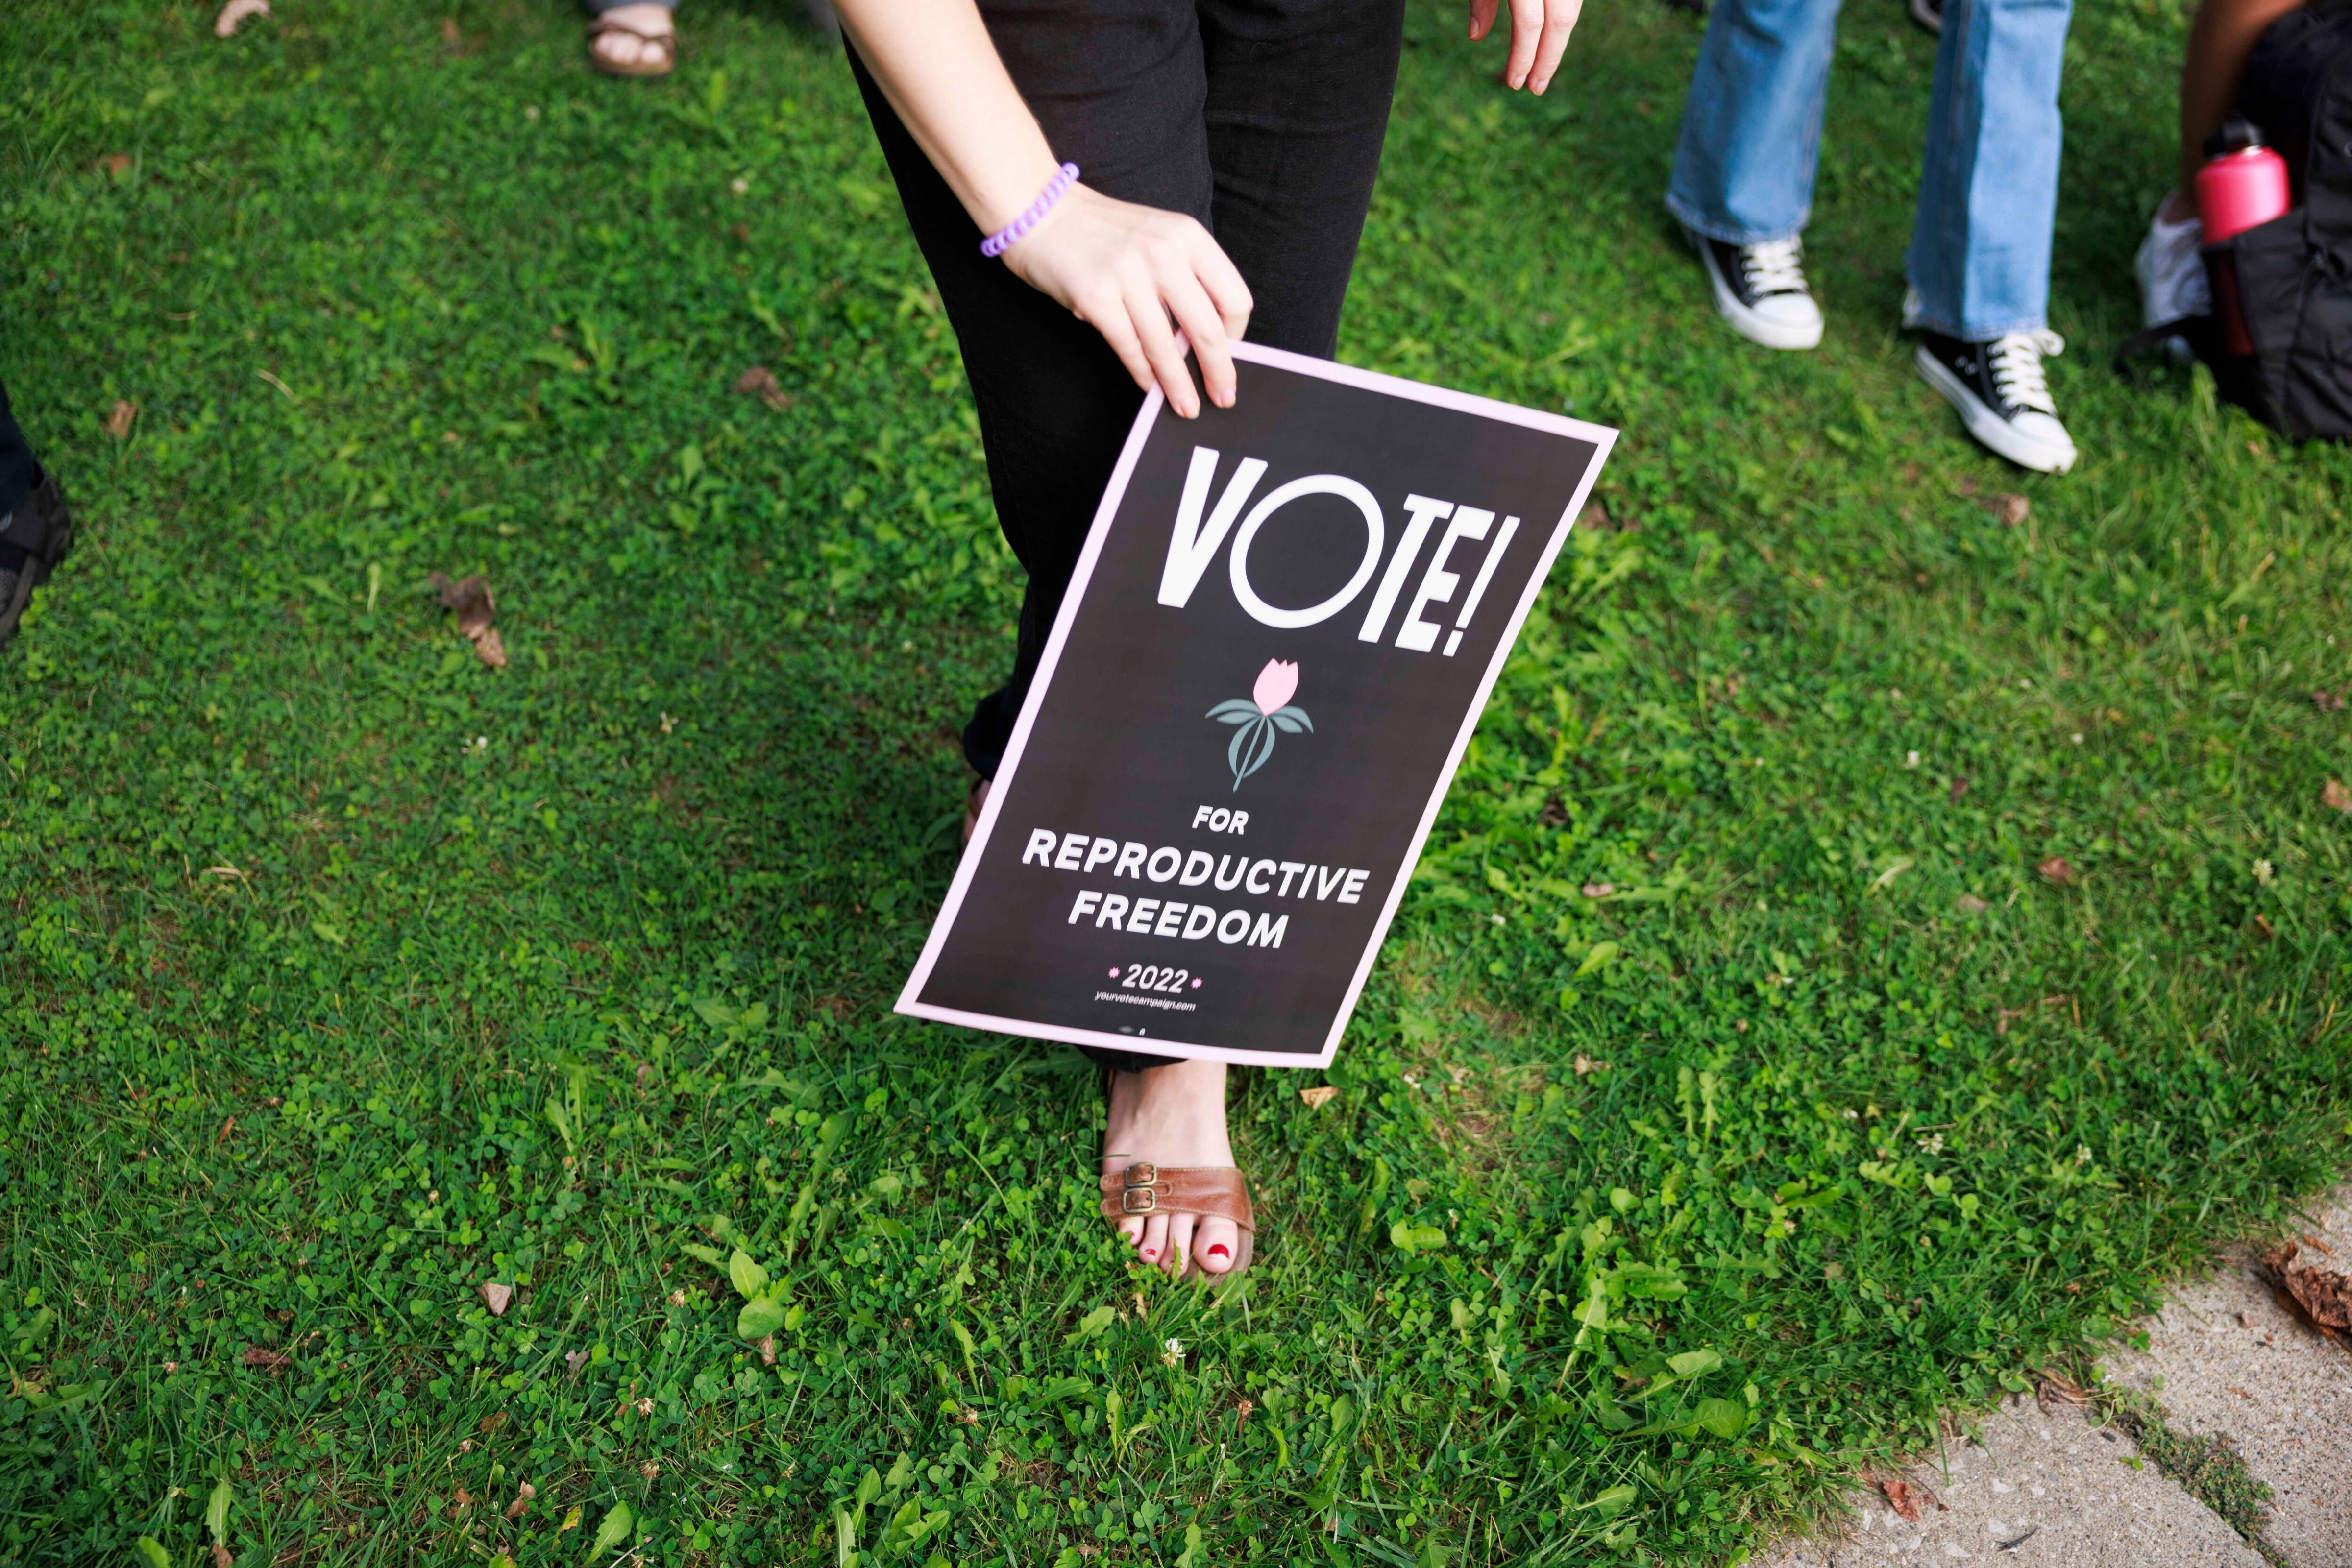 An abortion-rights activist holds a sign protesting a state abortion ban in Bloomington, Ind., on Sept. 15, 2022. (Jeremy Hogan—Getty Images)